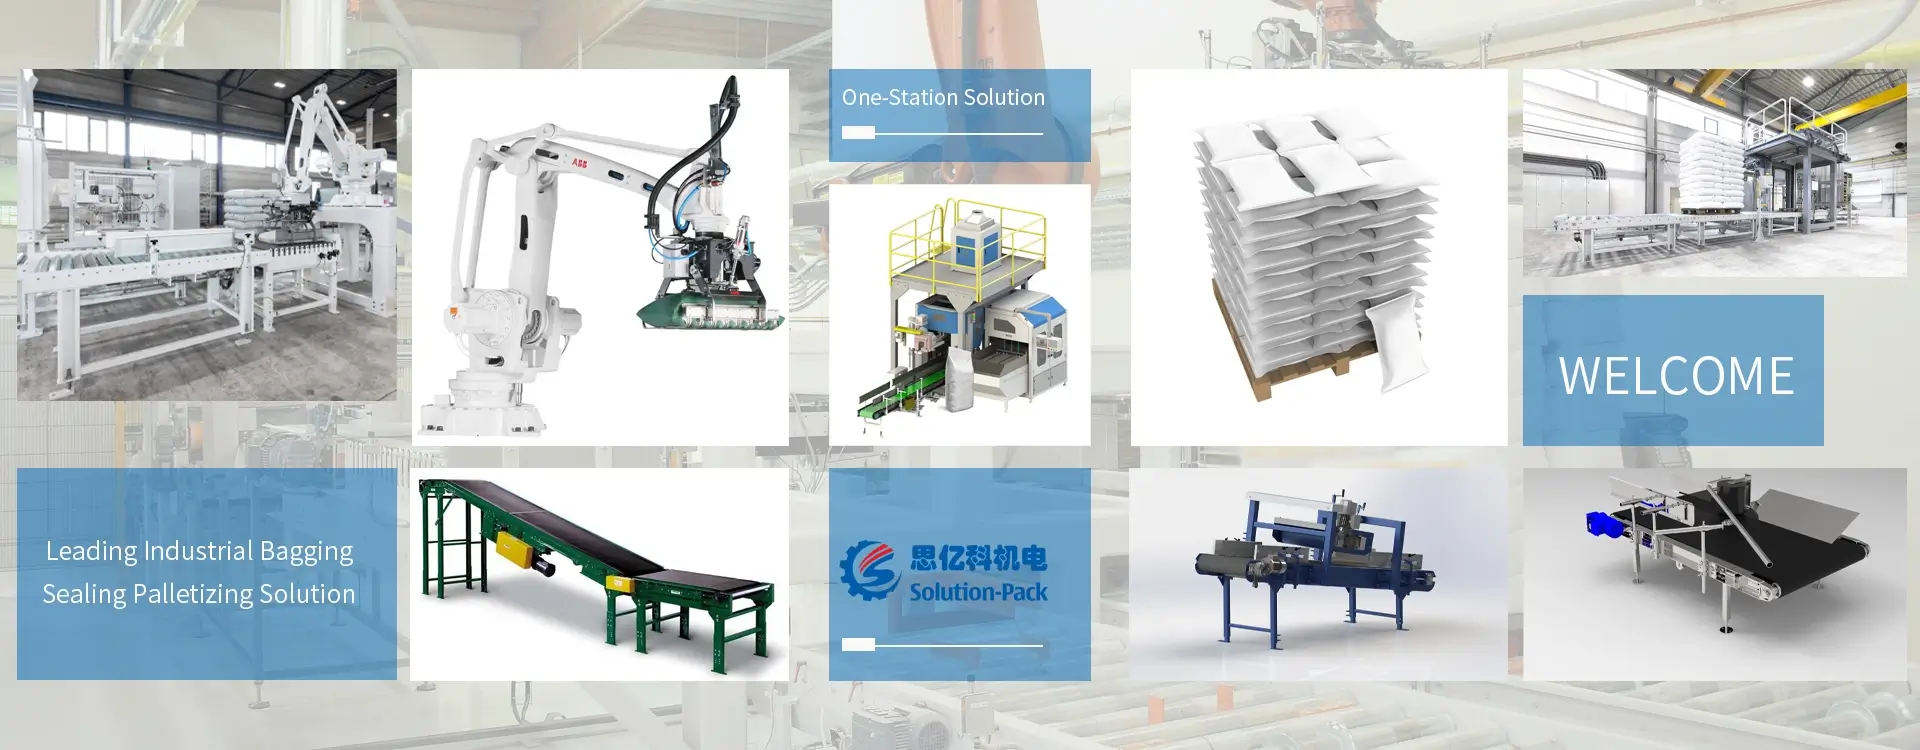 Model HTB-Z50BS Automatic Heavy Duty Bag Bagging Sealing Machine Unit for M Type Woven Bag | Solution-Pack (Bottom Banner Picture)